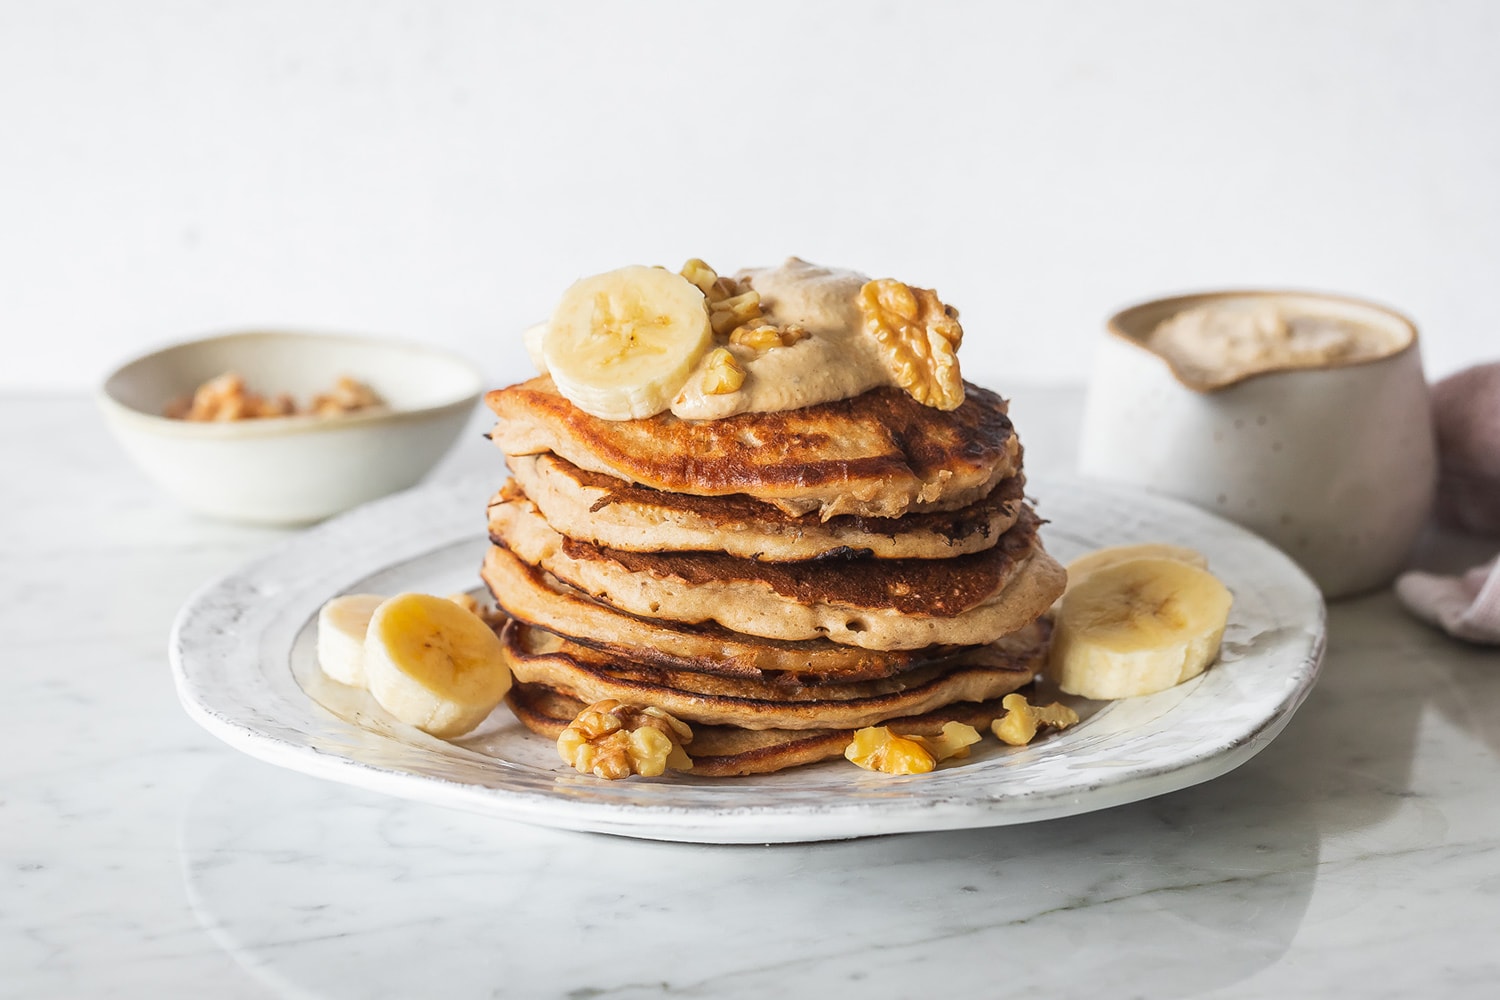 Banana Pancakes with Maple Syrup and Walnuts